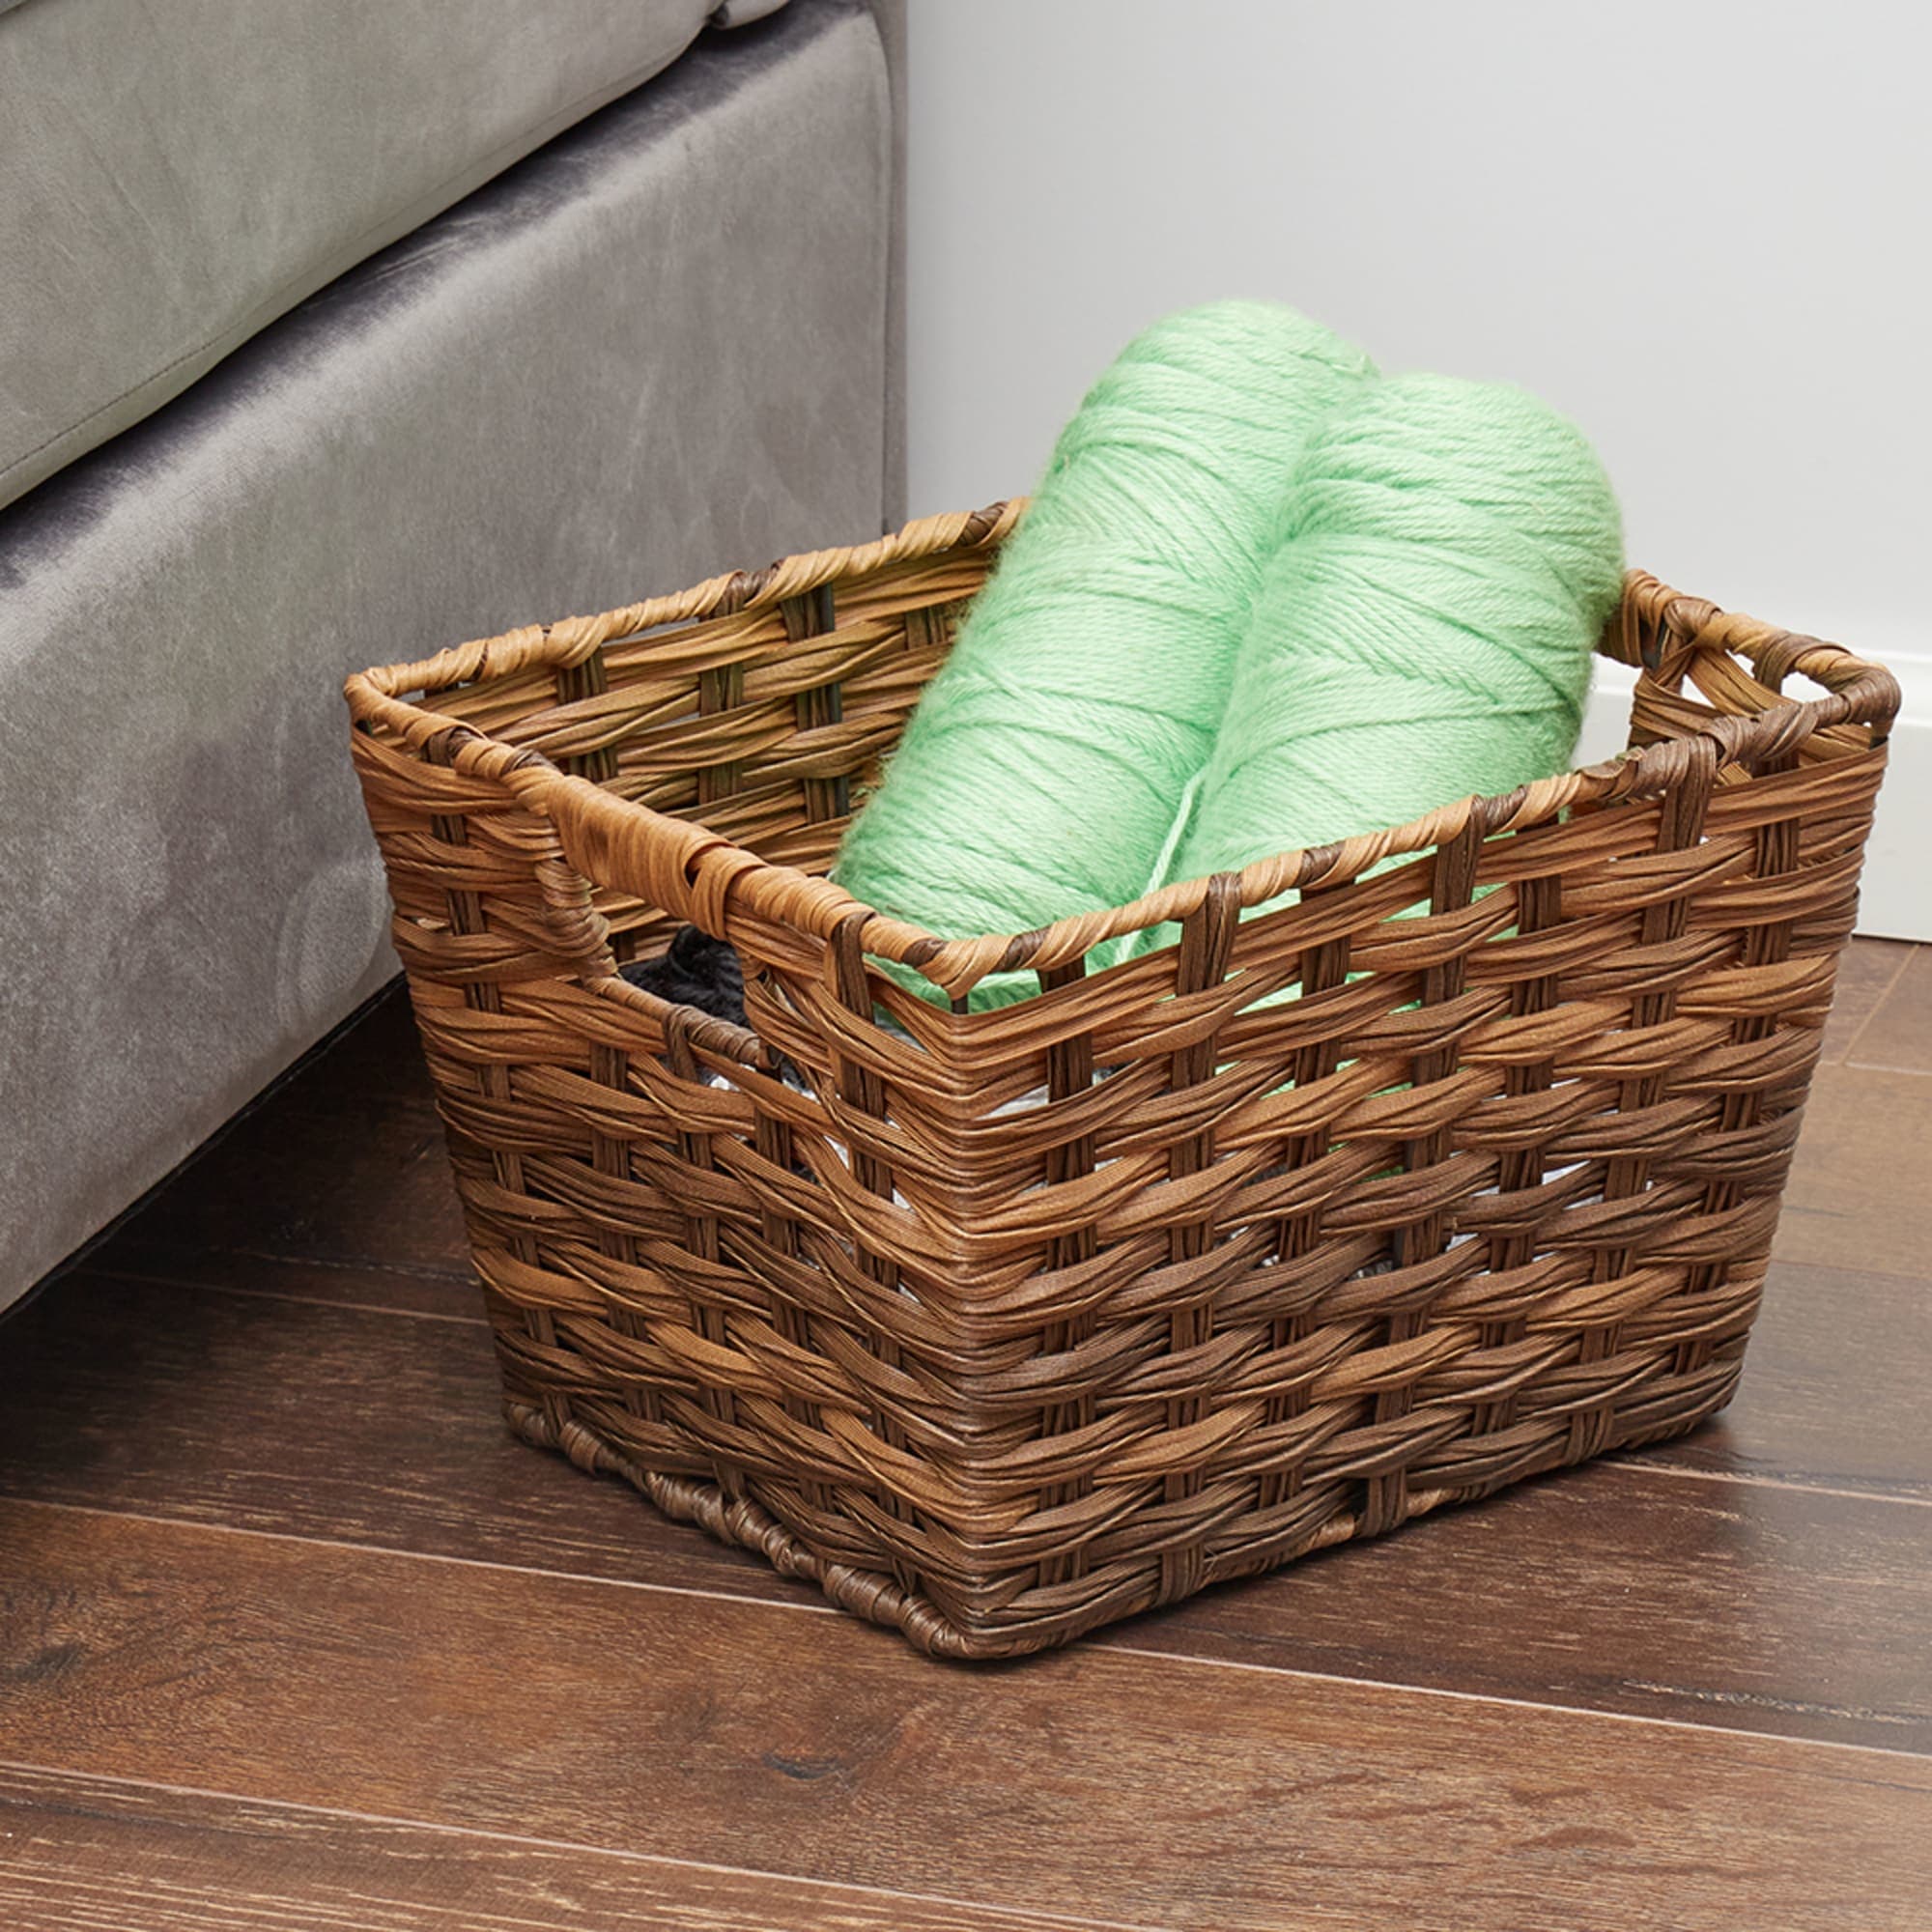 Home Basics Medium Faux Rattan Basket with Cut-out Handles, Coffee $10.00 EACH, CASE PACK OF 6